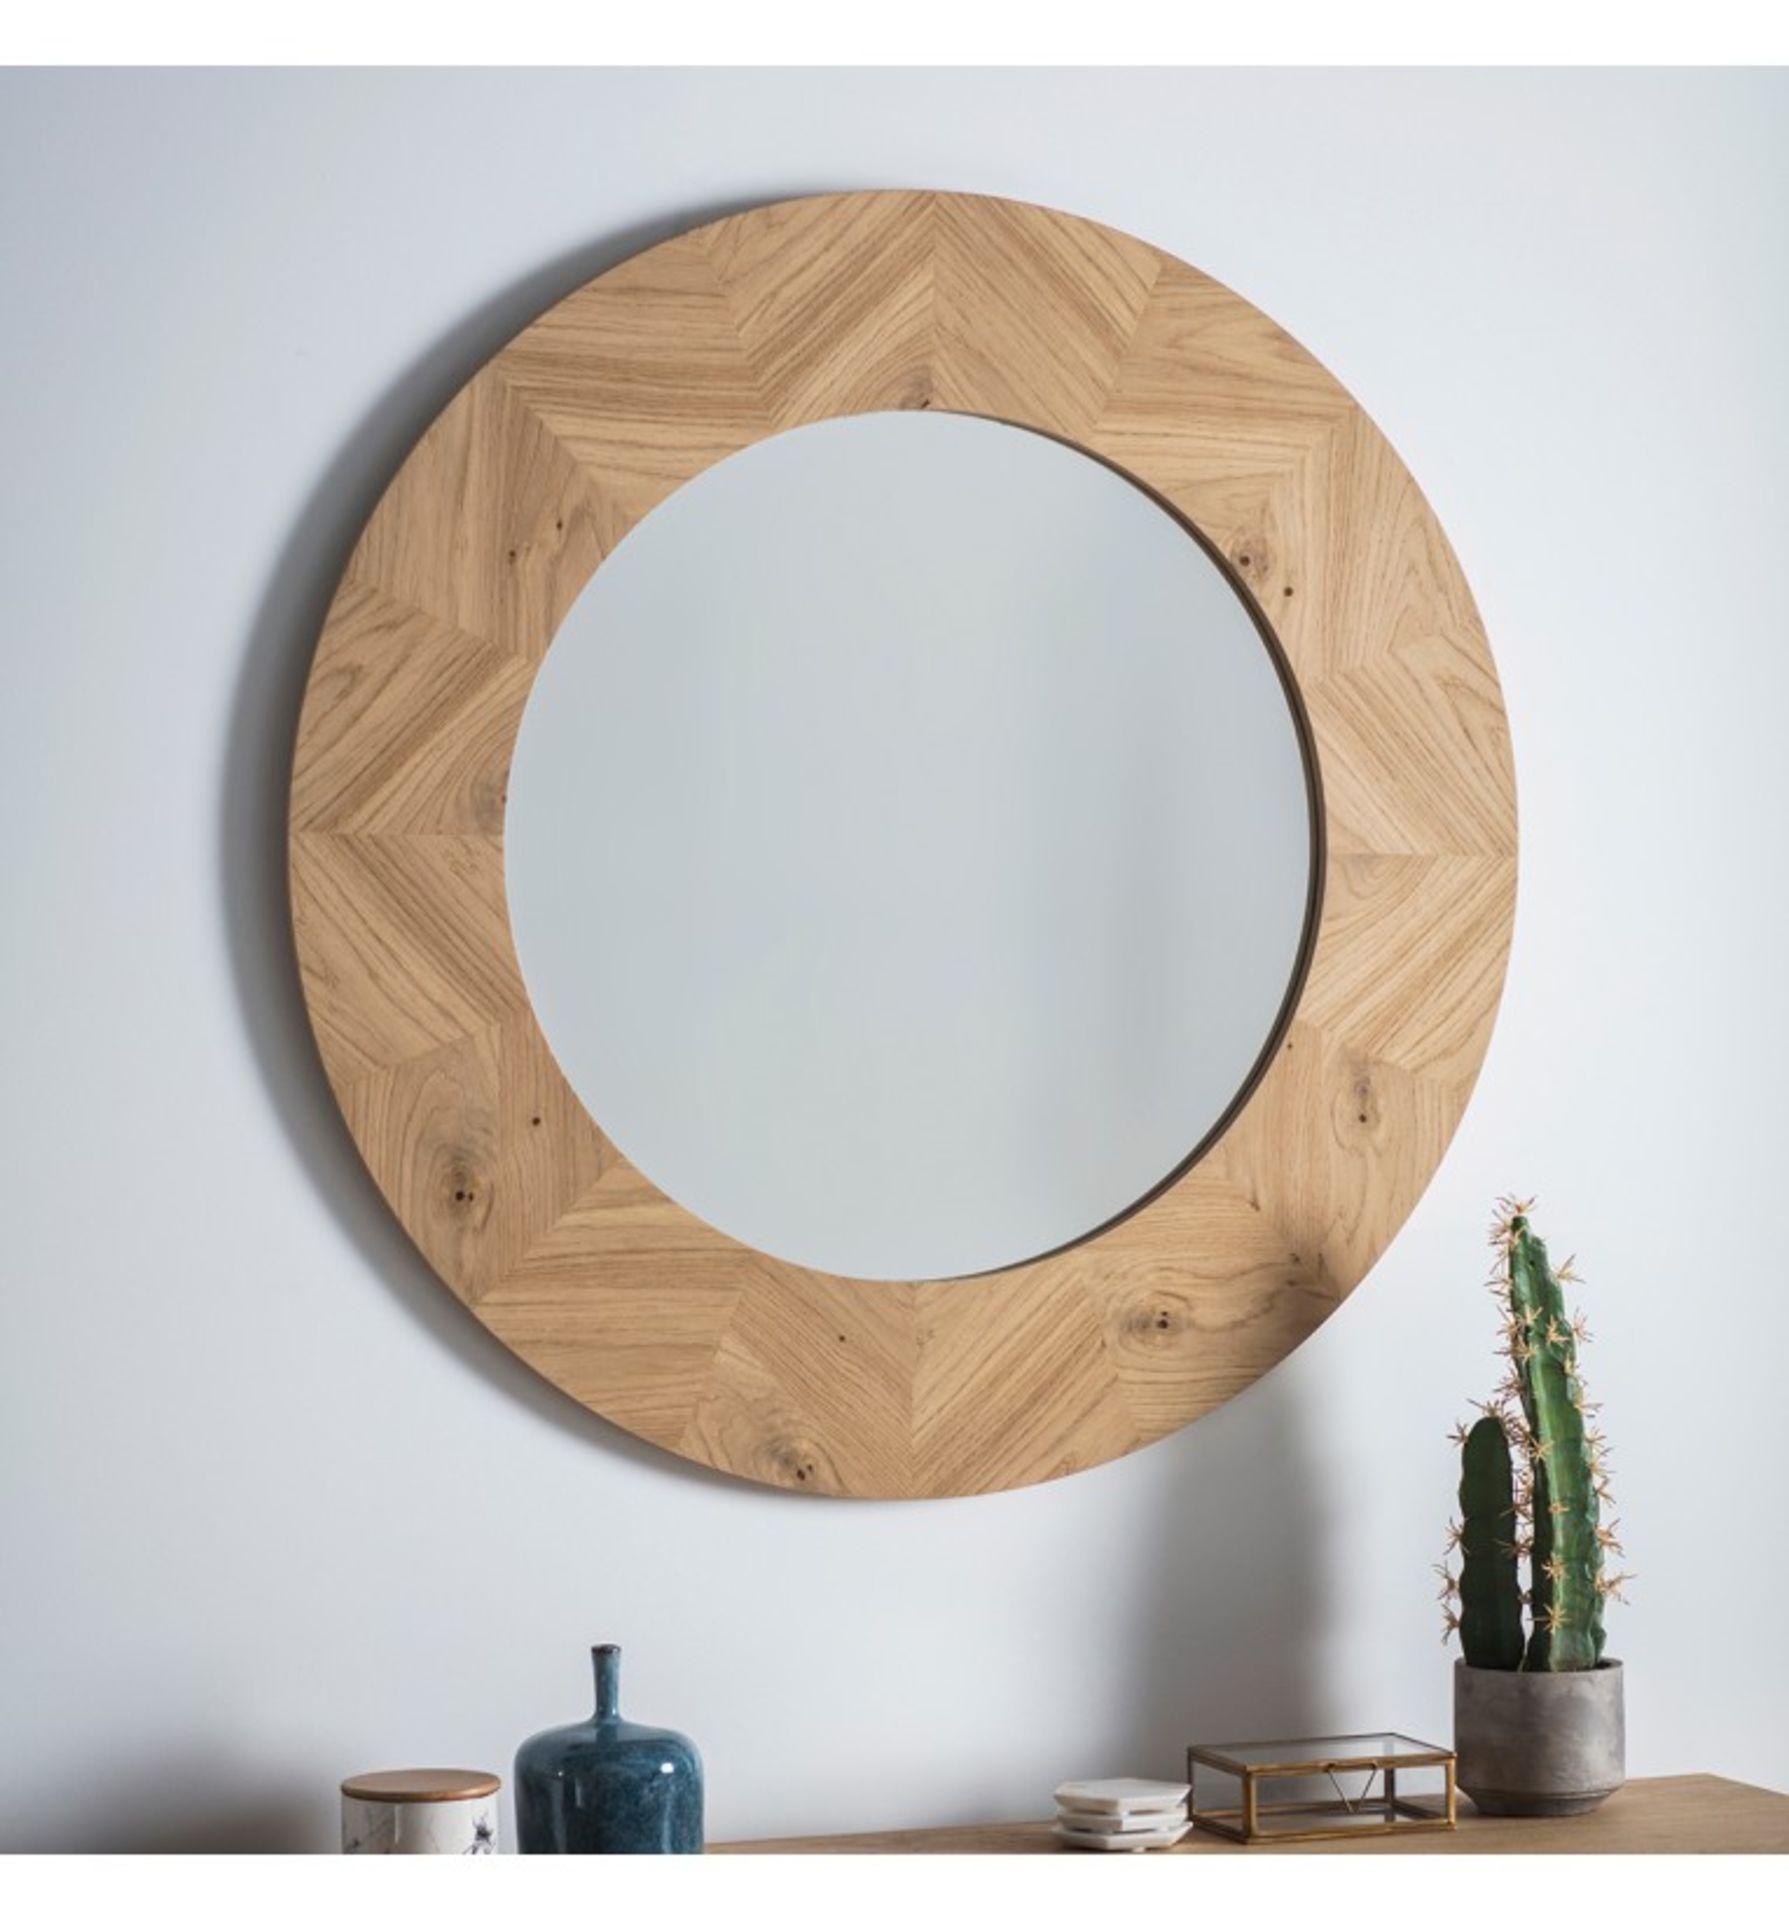 Milano Round Mirror 900 x 25 x 900mm Part Of Our Exllusive Milano Range Is This Matching Round